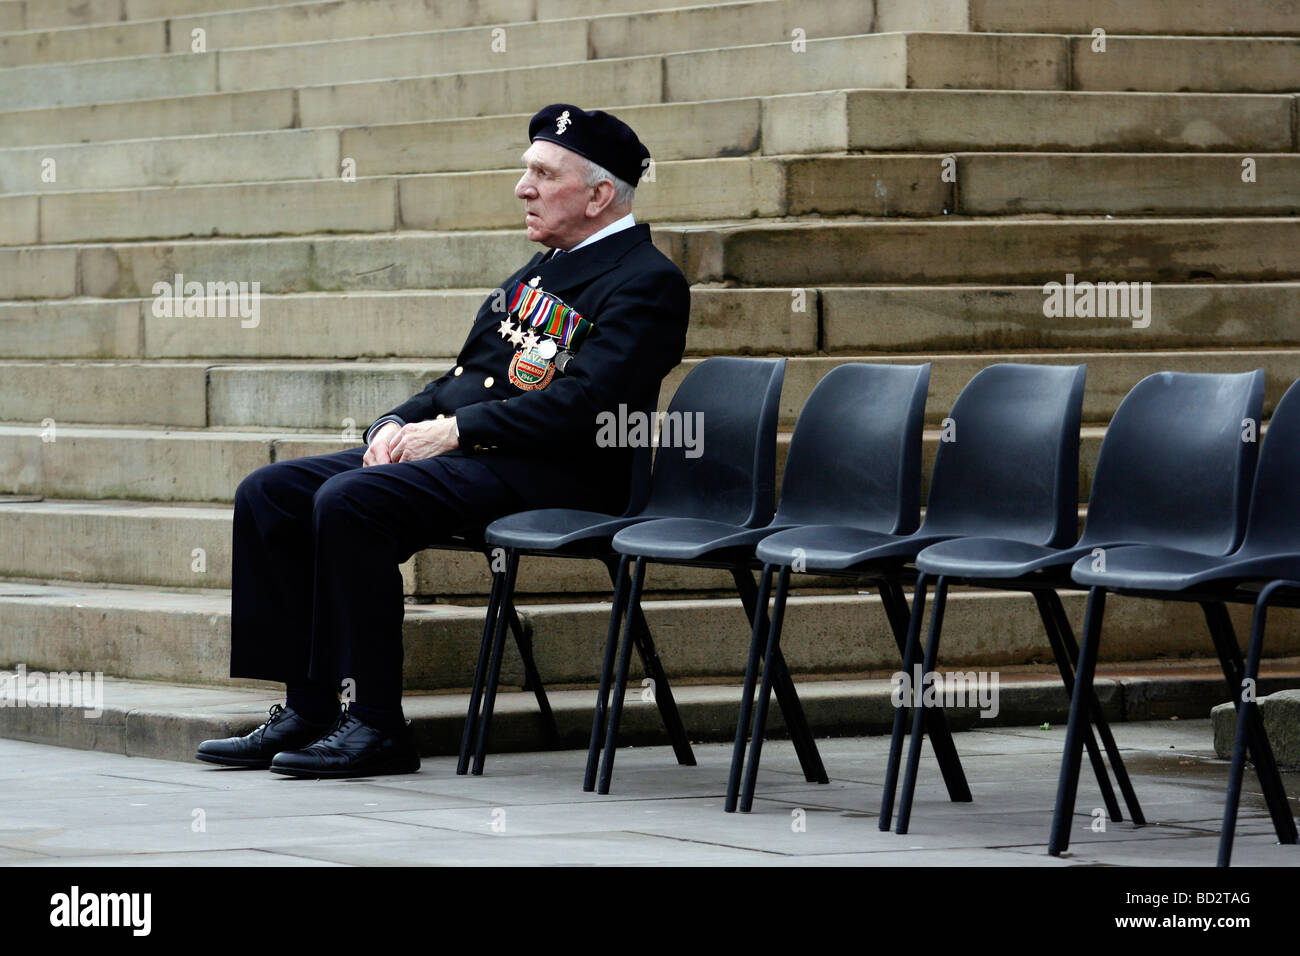 Normandy Veteran deep in thought at a Remembrance Day Service in England UK.  photo DON TONGE Stock Photo